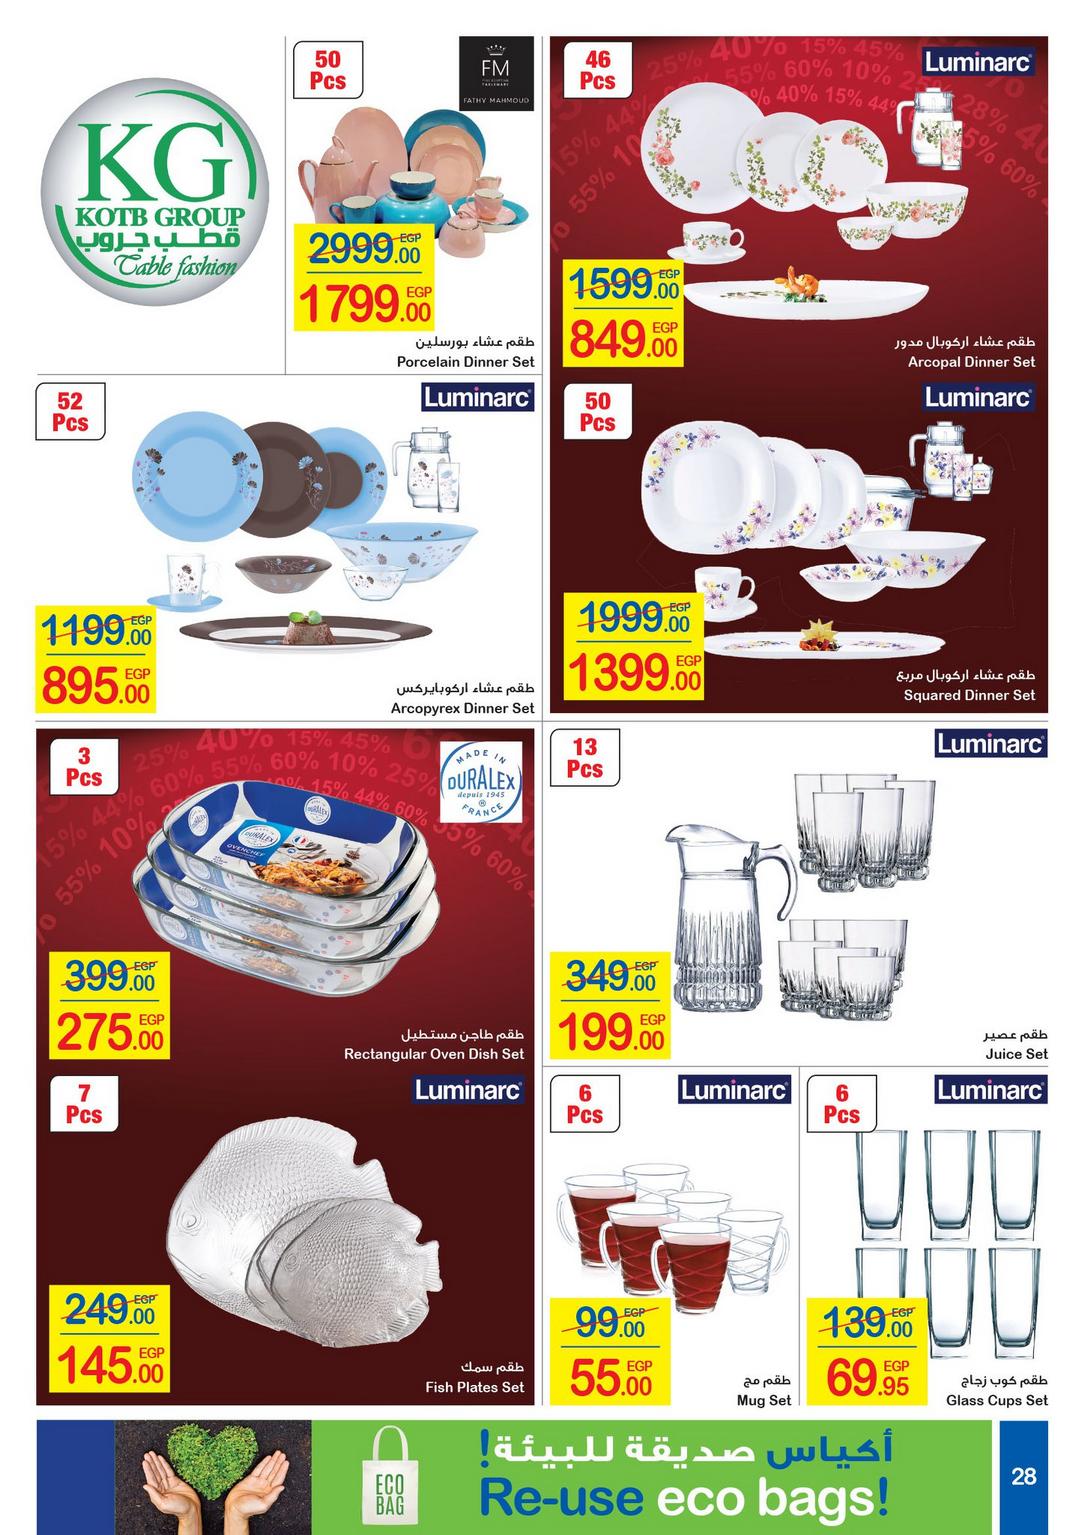 Carrefour Deals from 1/1 till 14/1 | Carrefour Egypt 29